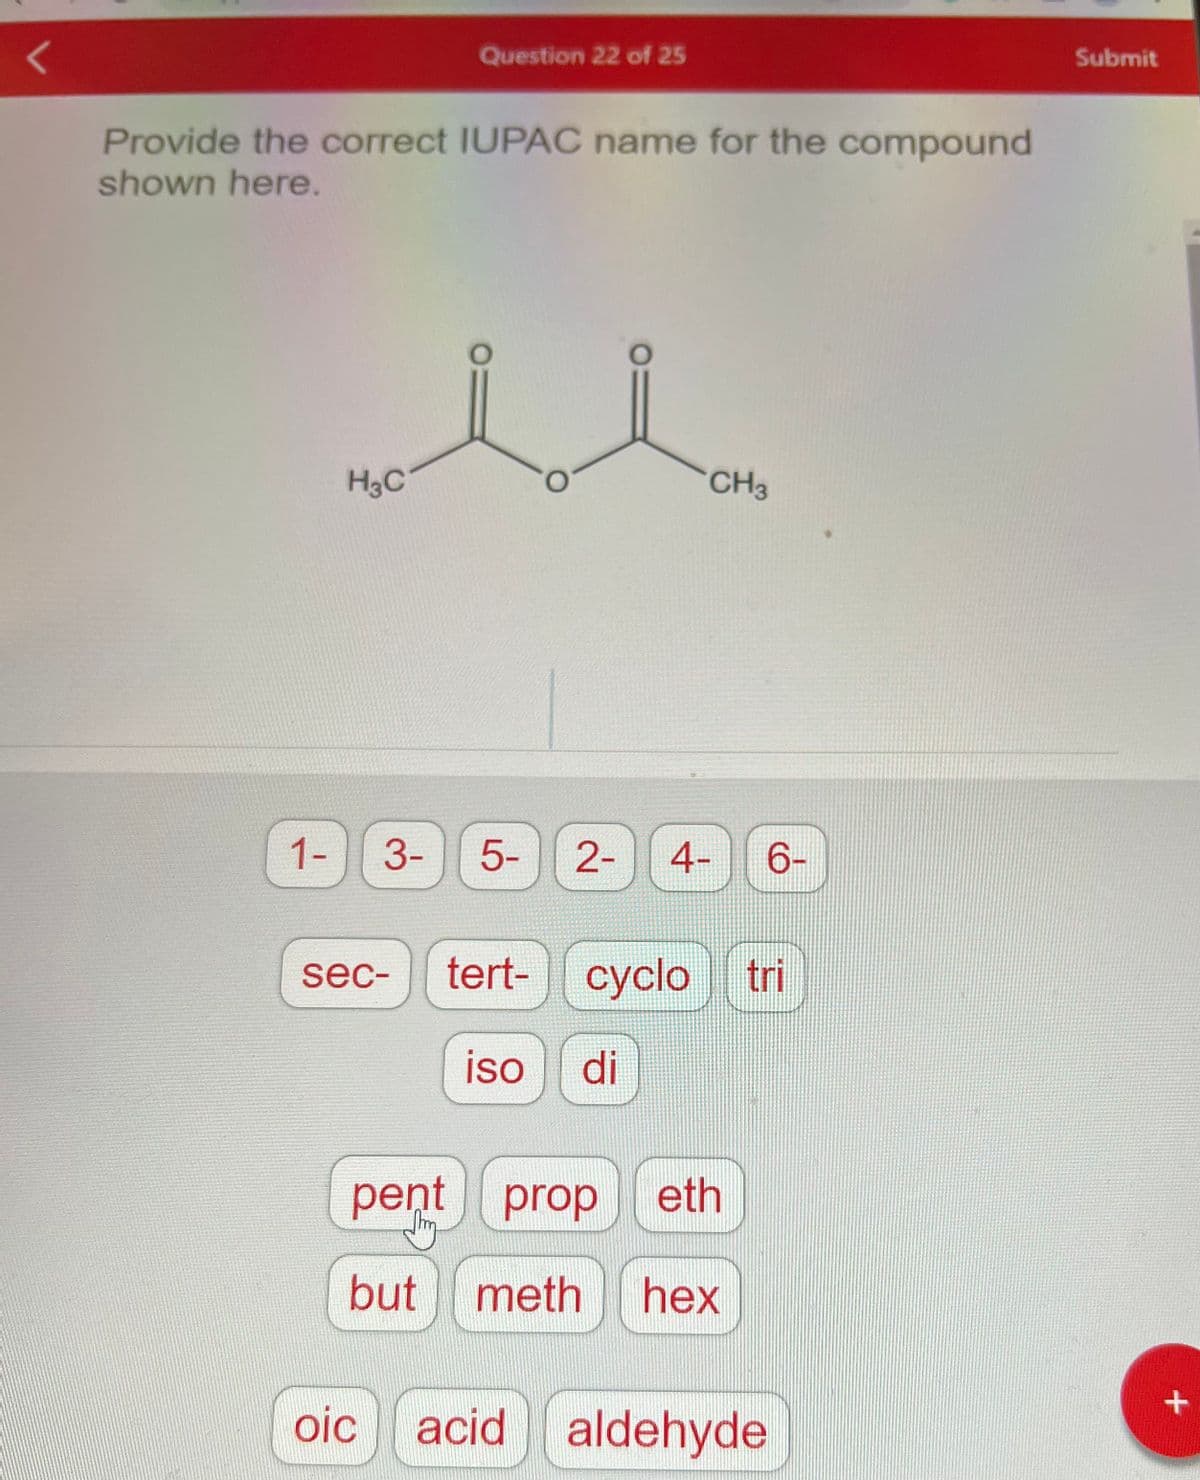 <
Provide the correct IUPAC name for the compound
shown here.
u
1-
H3C
Question 22 of 25
3-
sec-
oic
5-
tert-
2- 4-
CH3
iso di
cyclo tri
pent prop eth
J
but
meth hex
6-
acid aldehyde
Submit
+